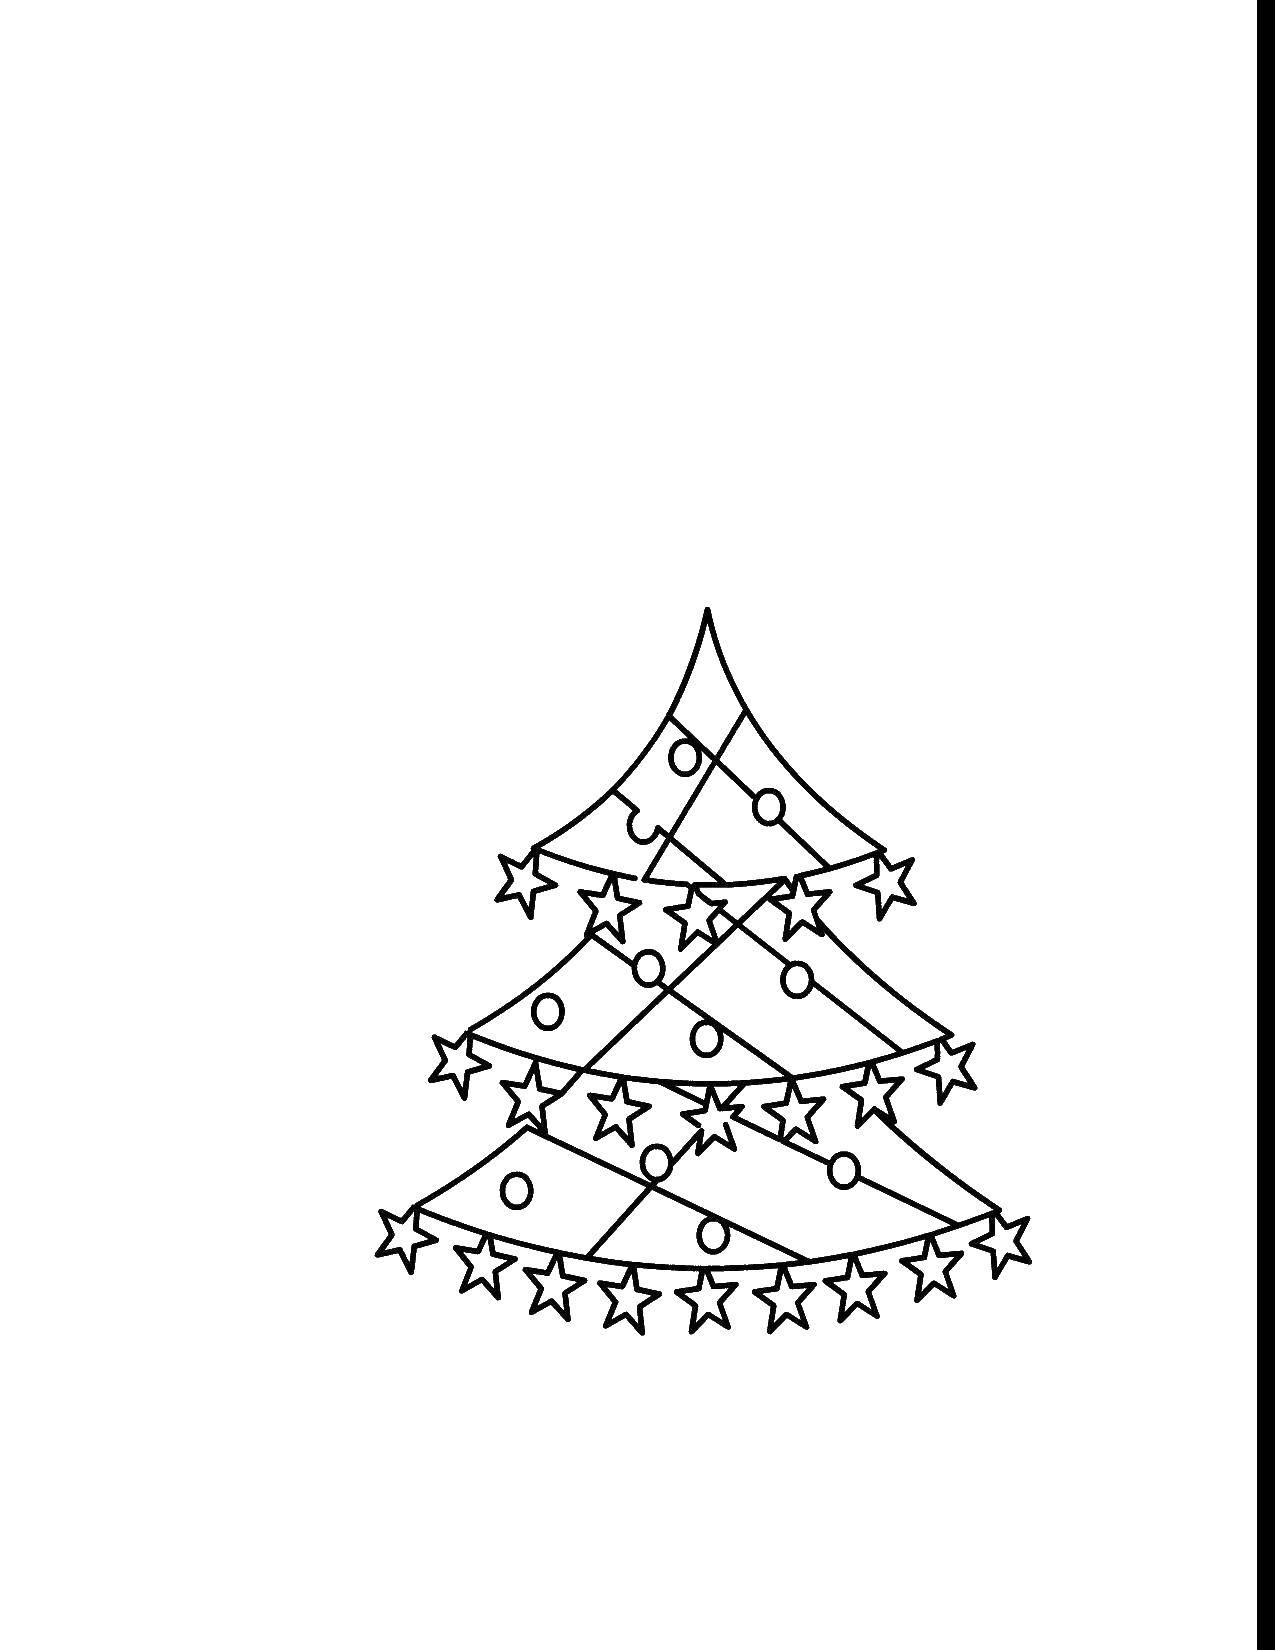 Coloring Christmas tree. Category new year. Tags:  new year, tree.